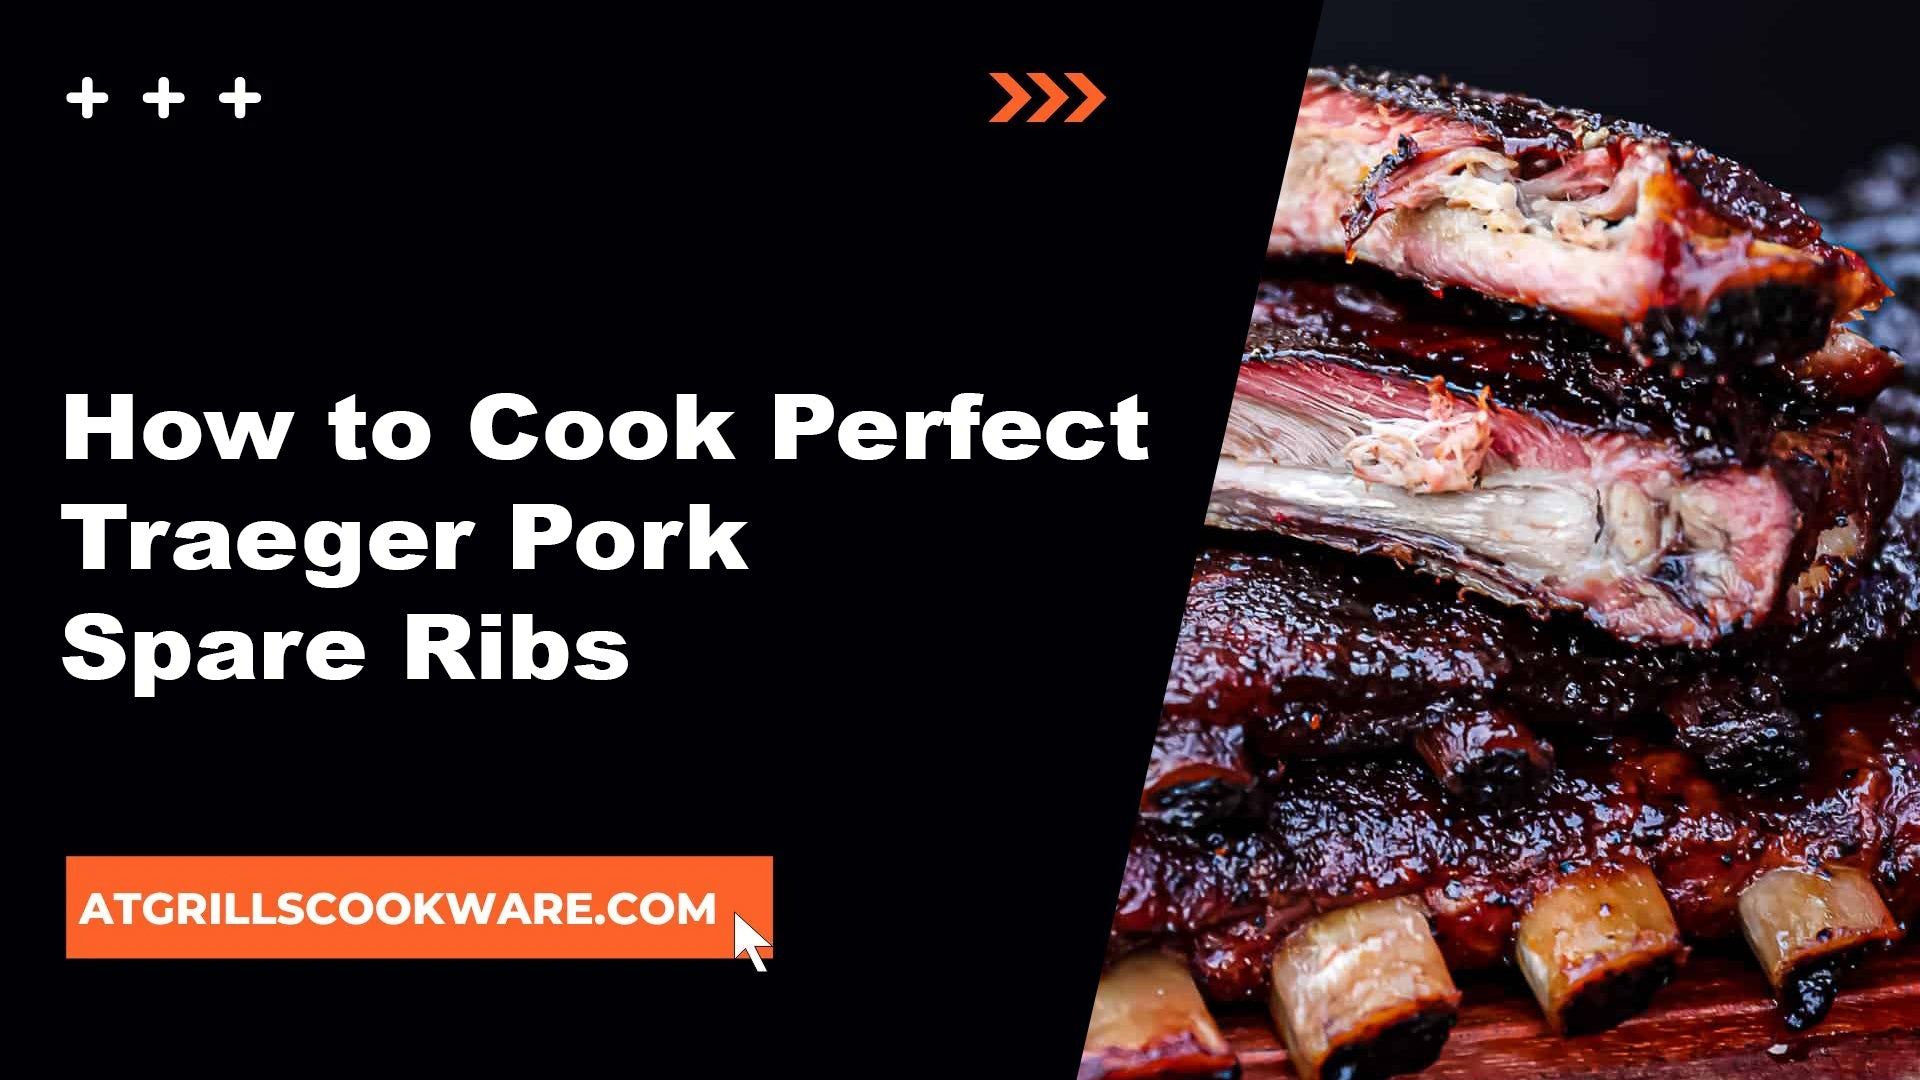 How to Cook Perfect Traeger Pork Spare Ribs